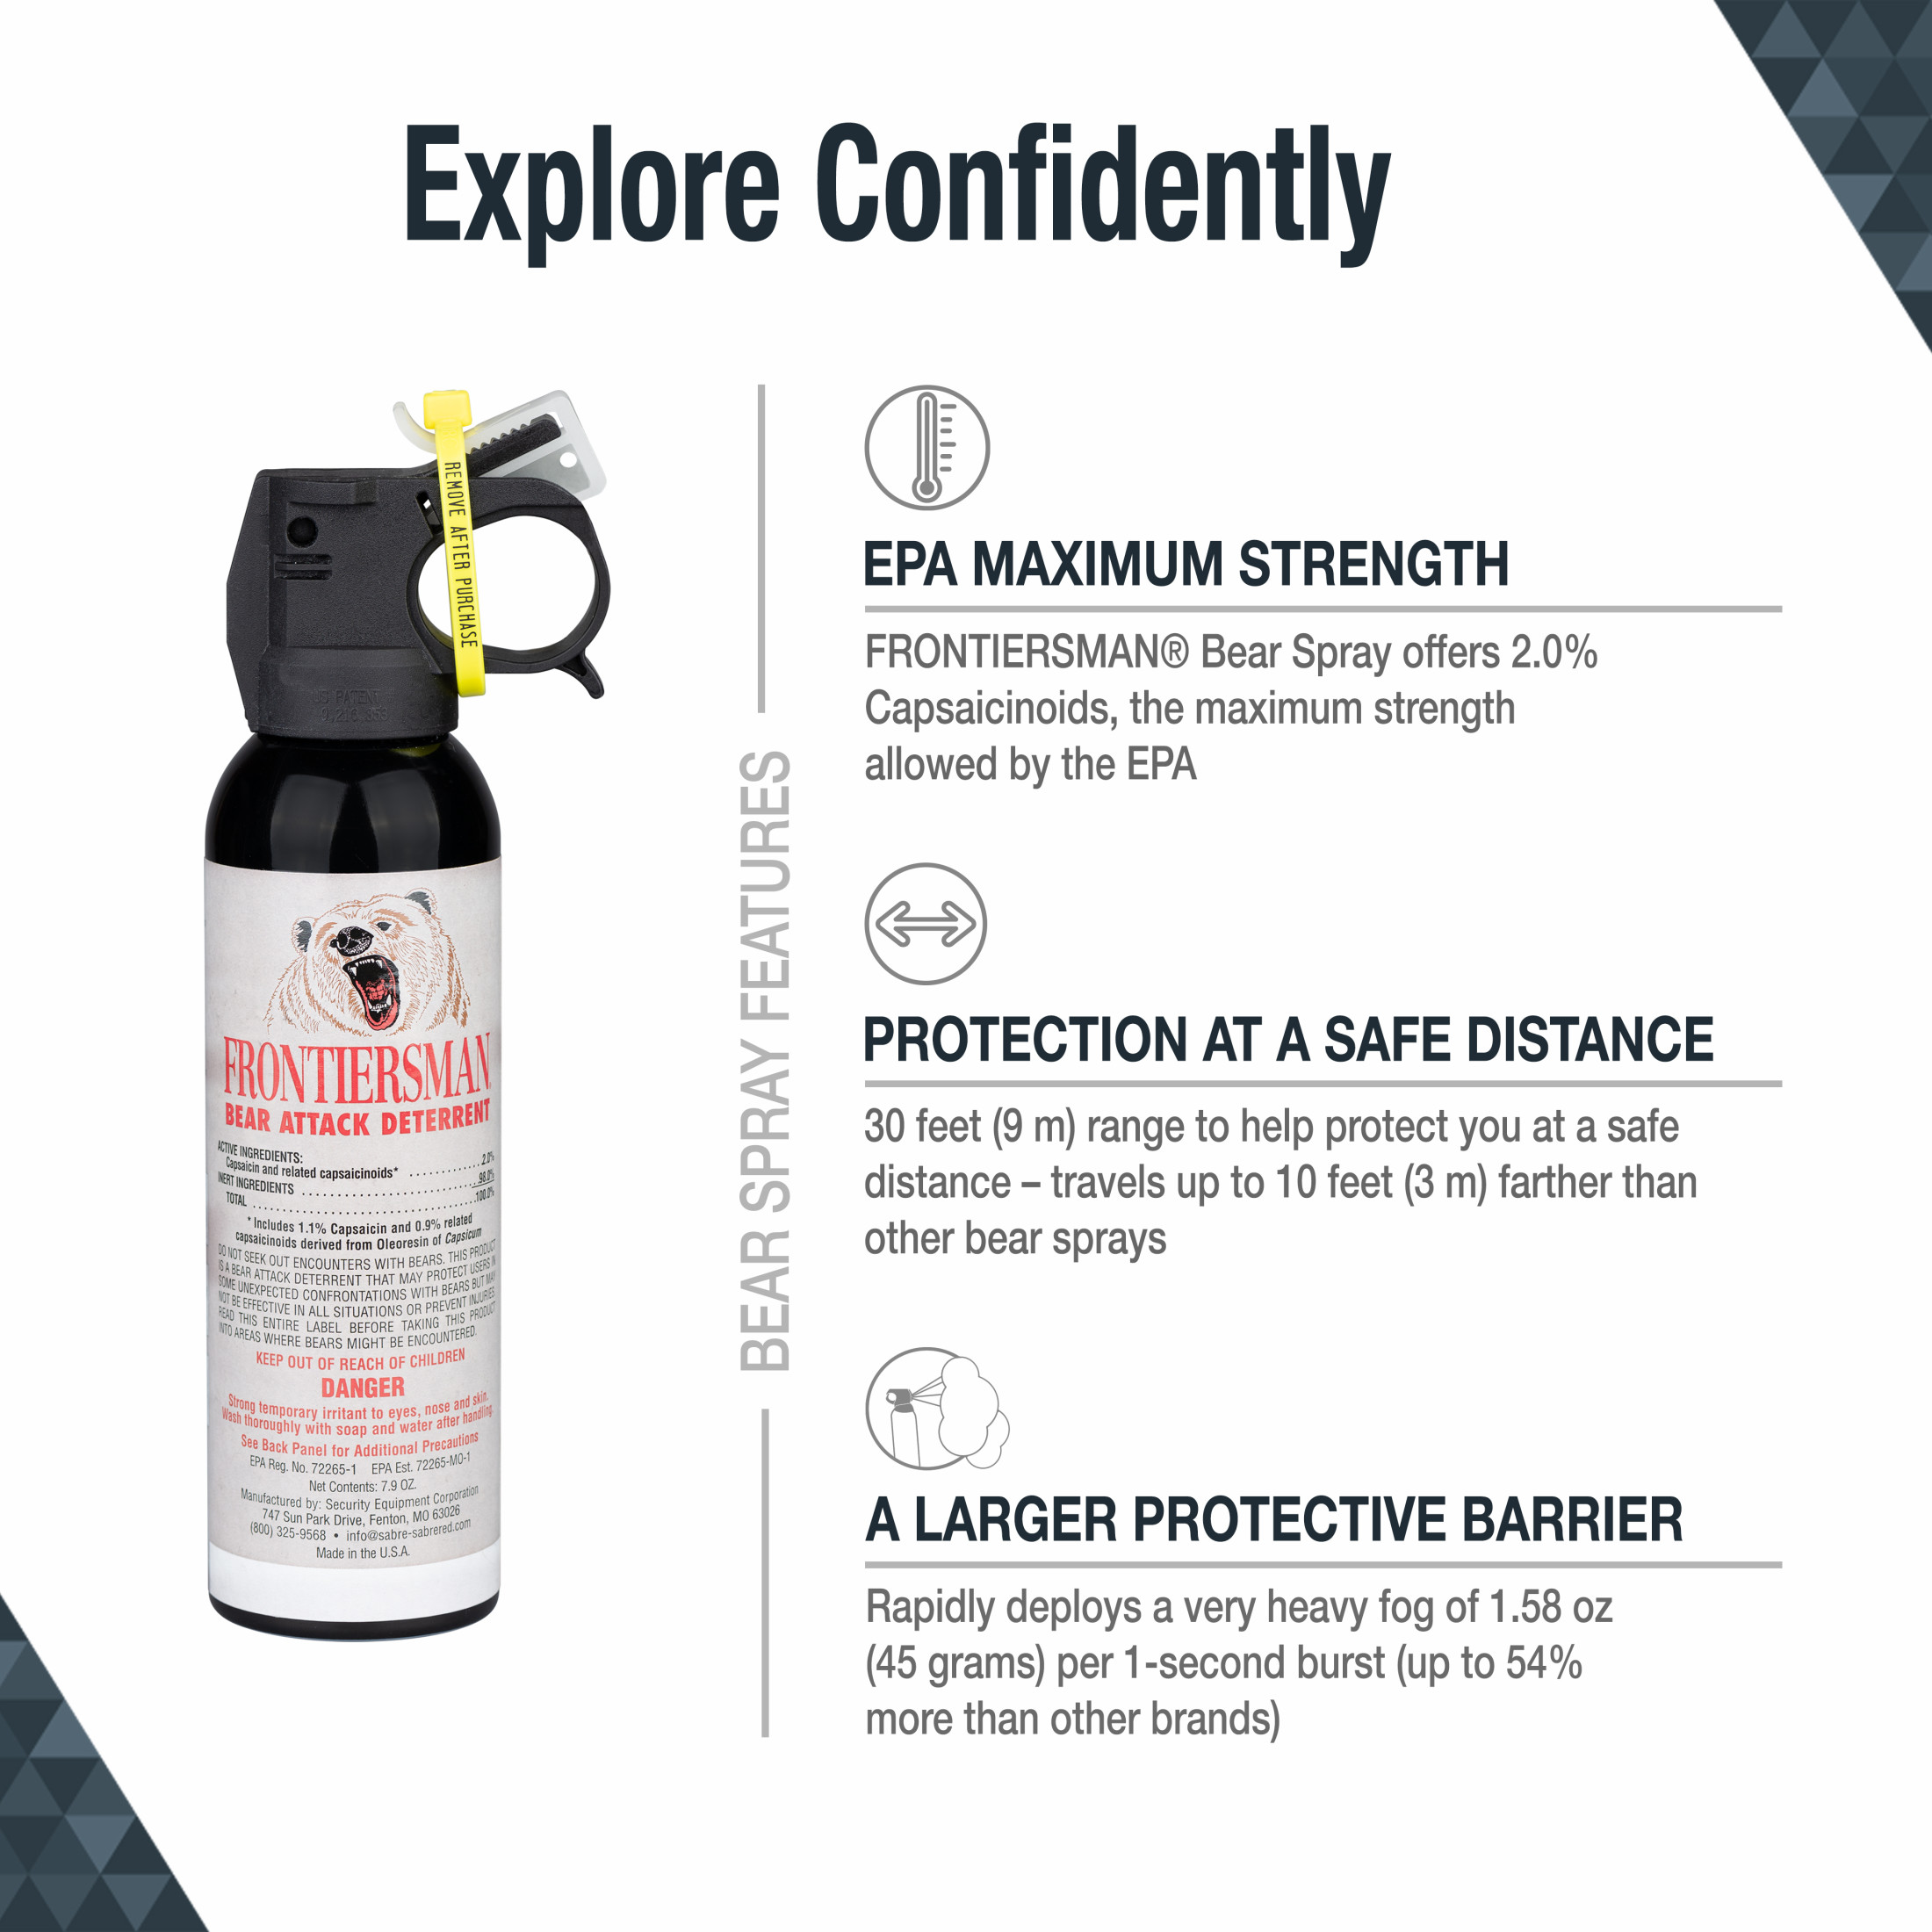 SABRE Frontiersman 7.9 oz. Bear Spray Deterrent with Belt Holster, White, 8.5 in. - image 4 of 12